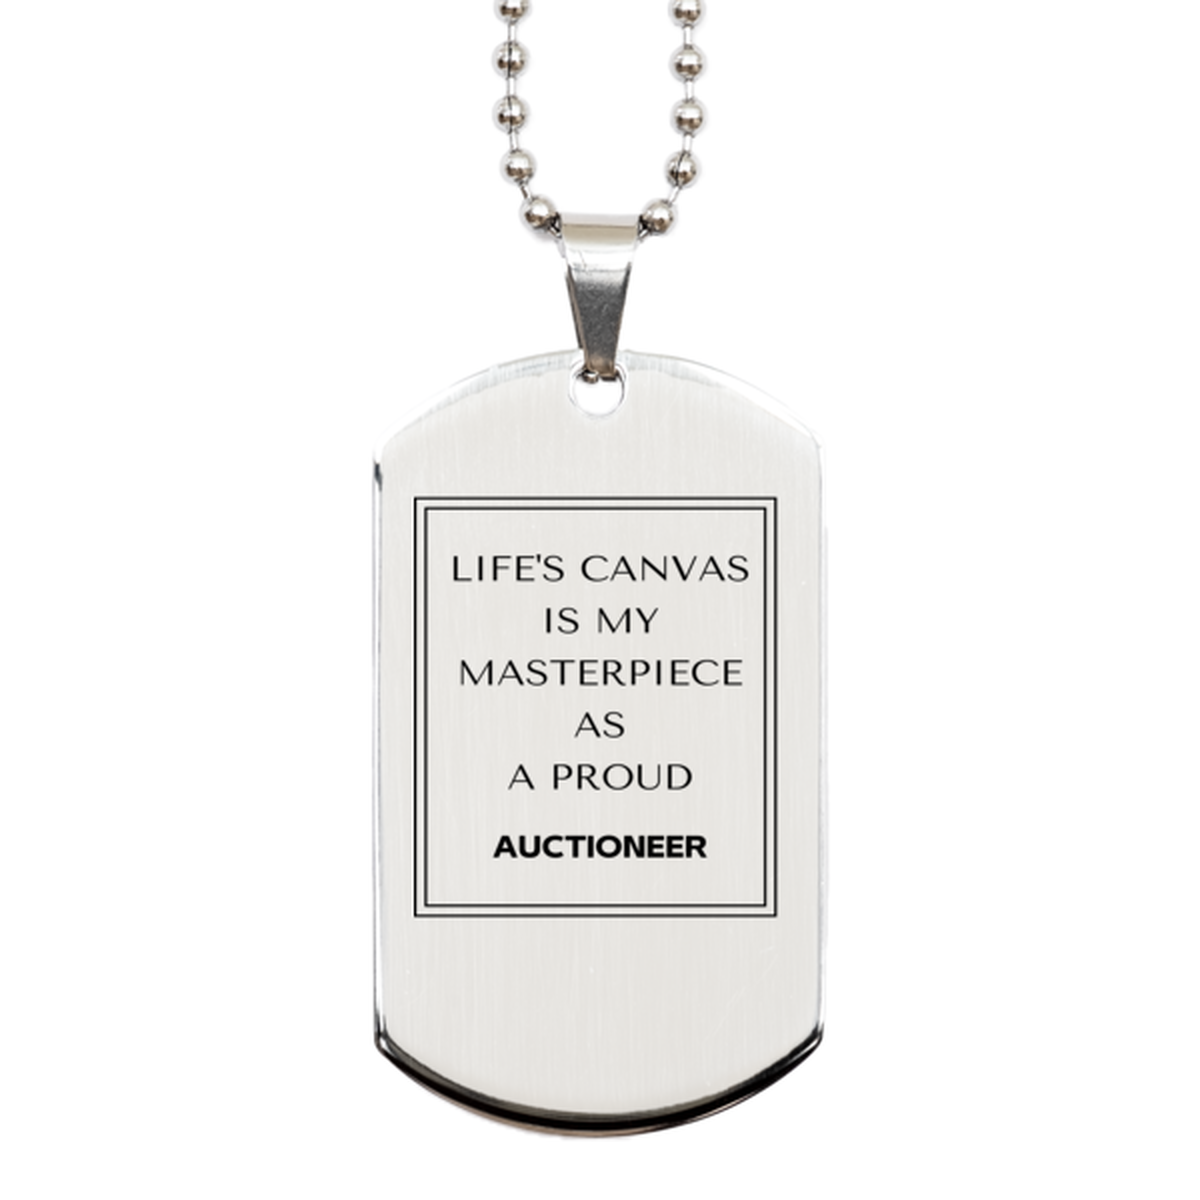 Proud Auctioneer Gifts, Life's canvas is my masterpiece, Epic Birthday Christmas Unique Silver Dog Tag For Auctioneer, Coworkers, Men, Women, Friends